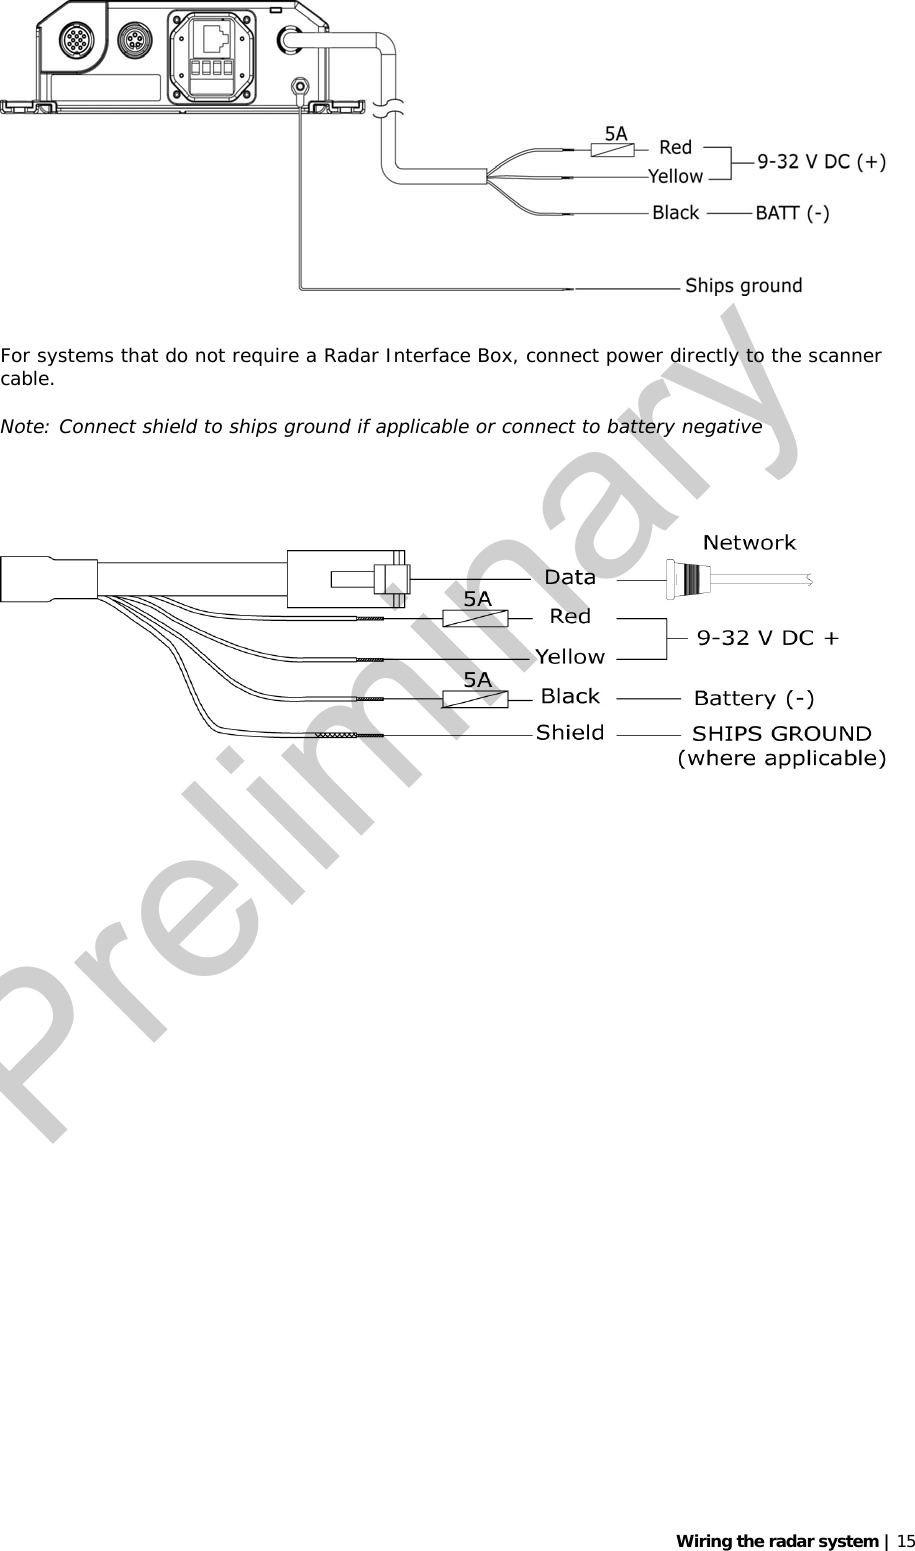   Wiring the radar system | 15    For systems that do not require a Radar Interface Box, connect power directly to the scanner cable.  Note: Connect shield to ships ground if applicable or connect to battery negative     Preliminary